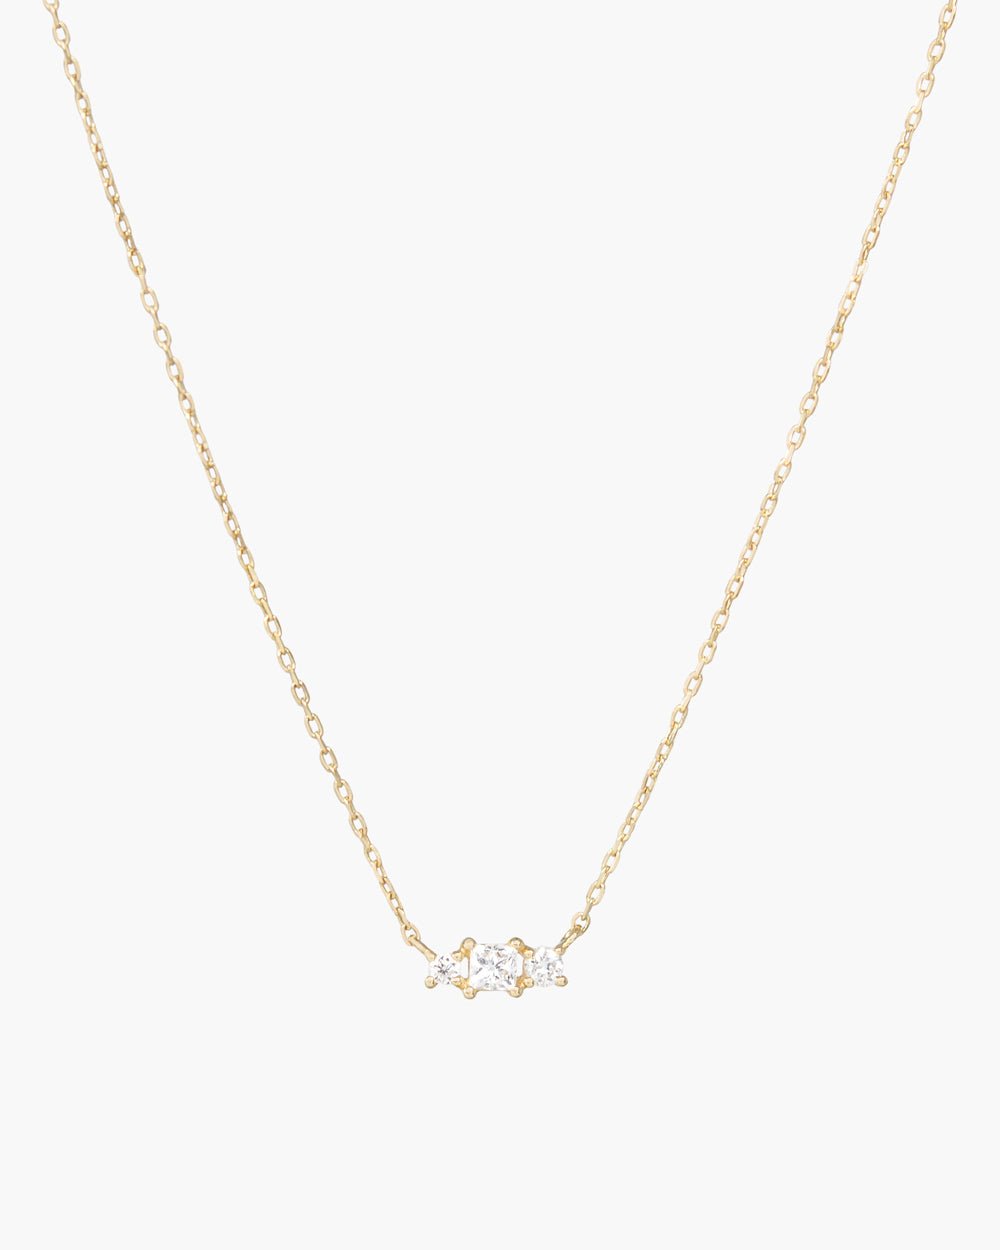 KENWOOD DIAMOND TRIO NECKLACE - Shop Cupcakes and Cashmere